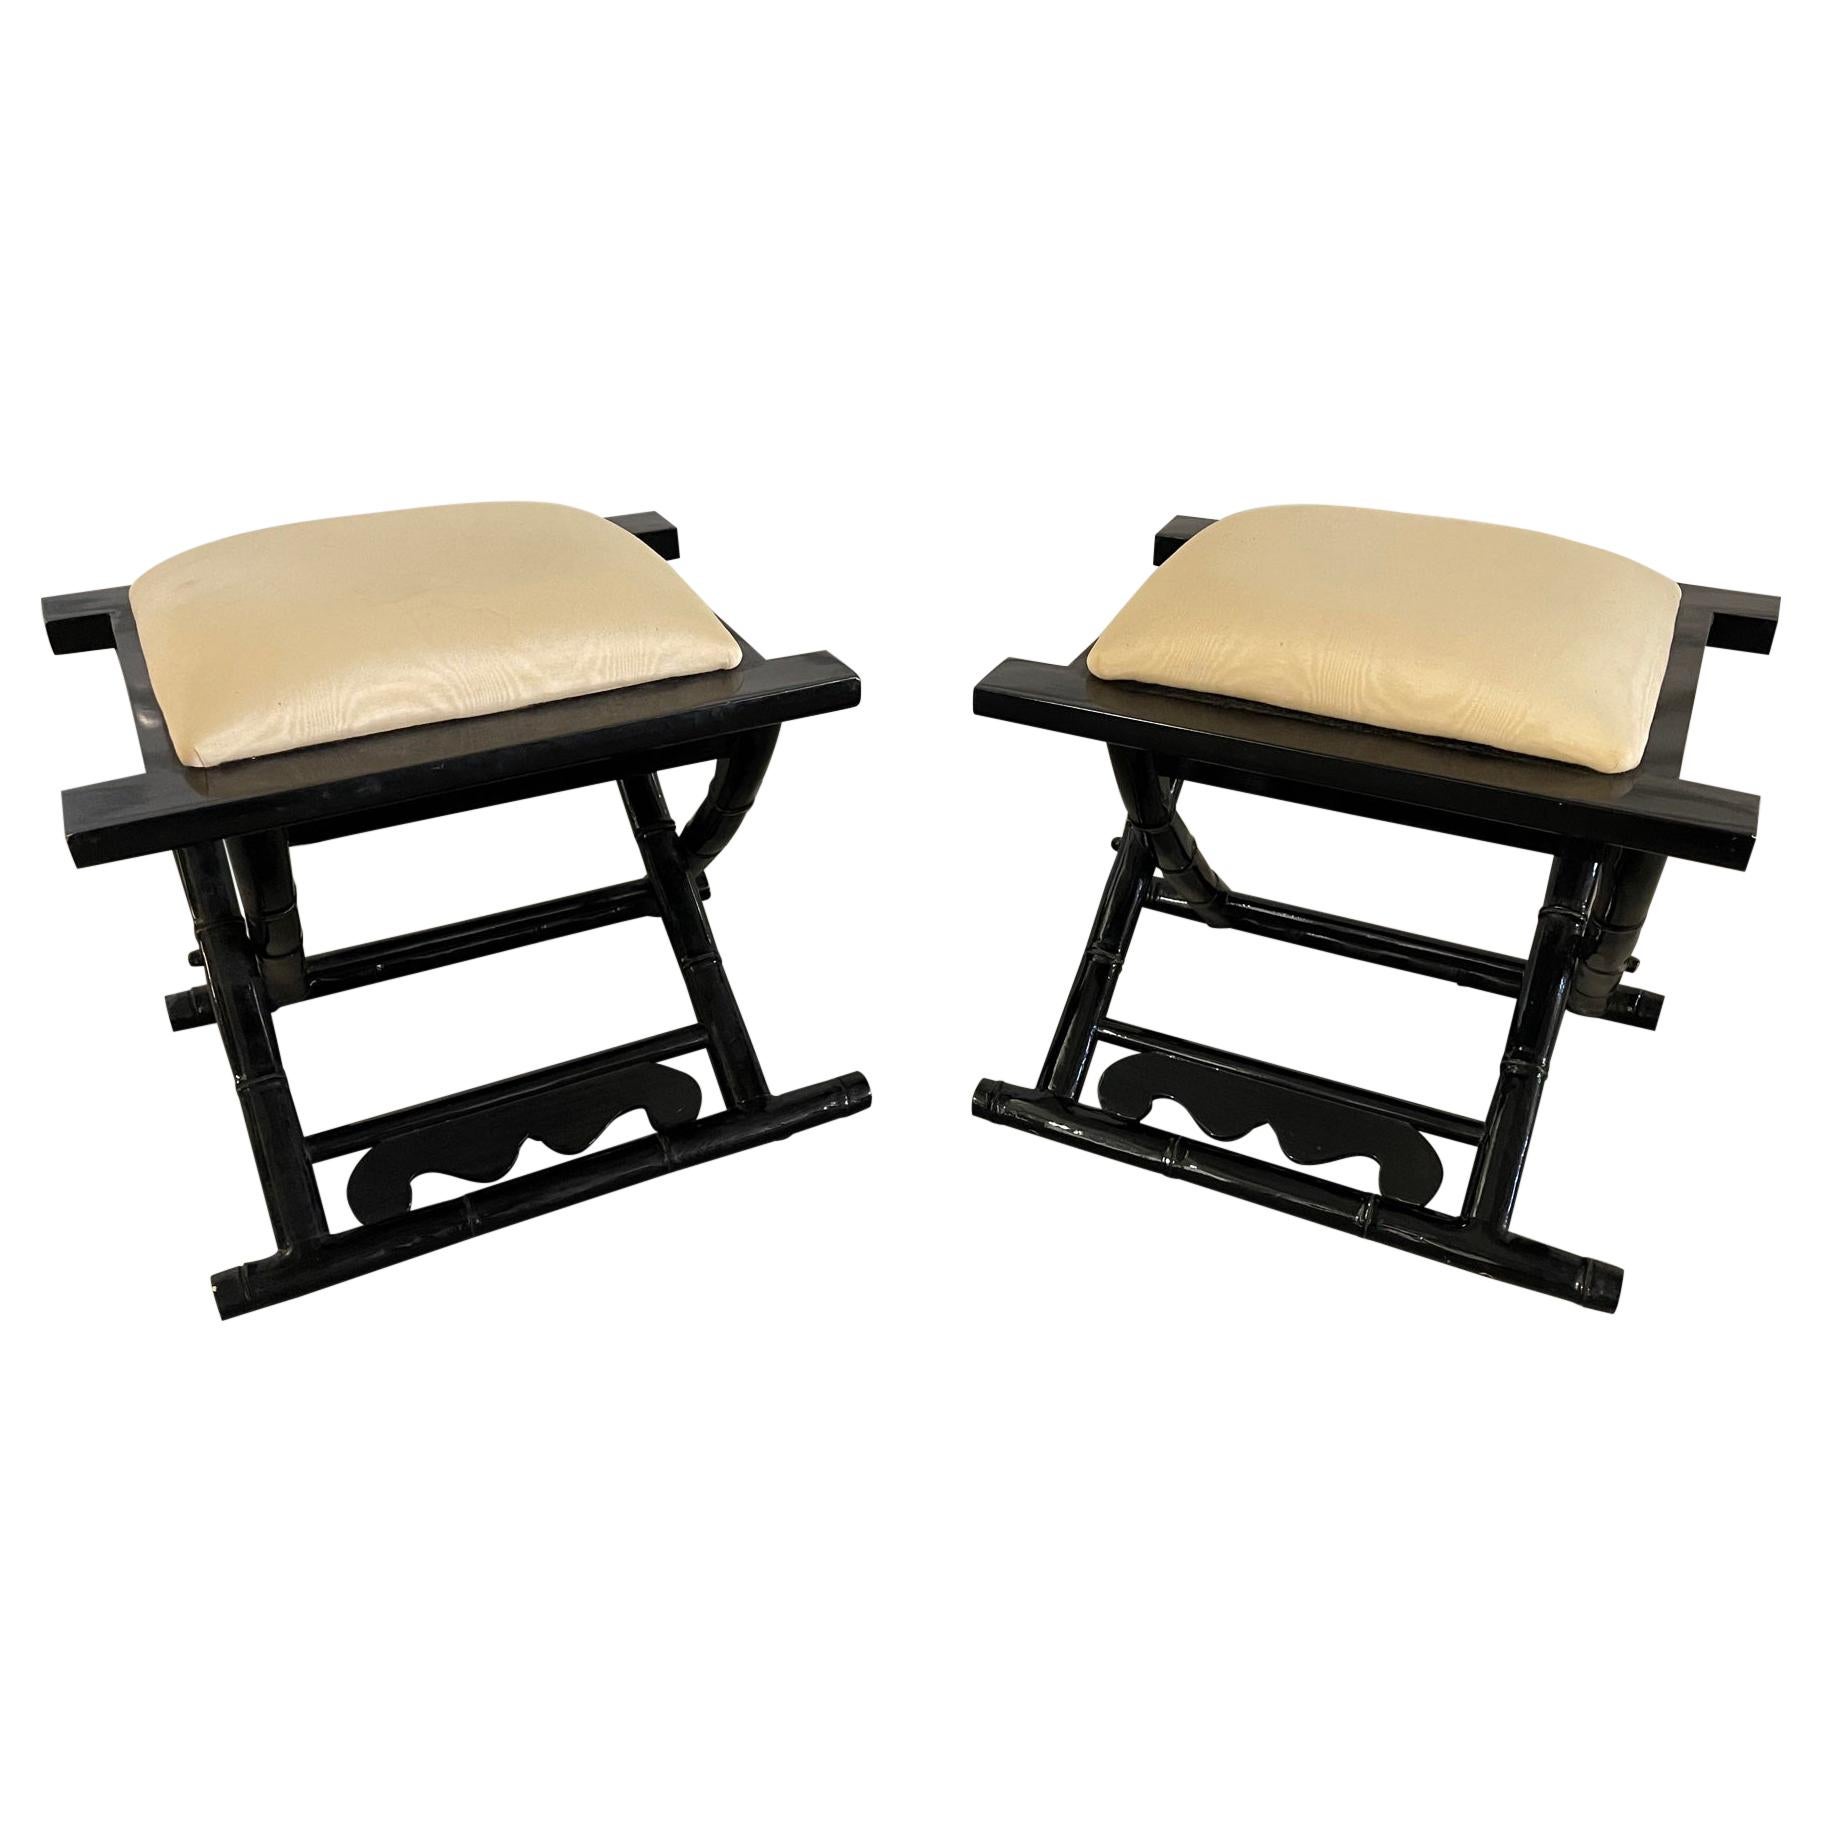 Pair of Possibly Casa Bella Black Lacquer Benches or Stools, 20th Century